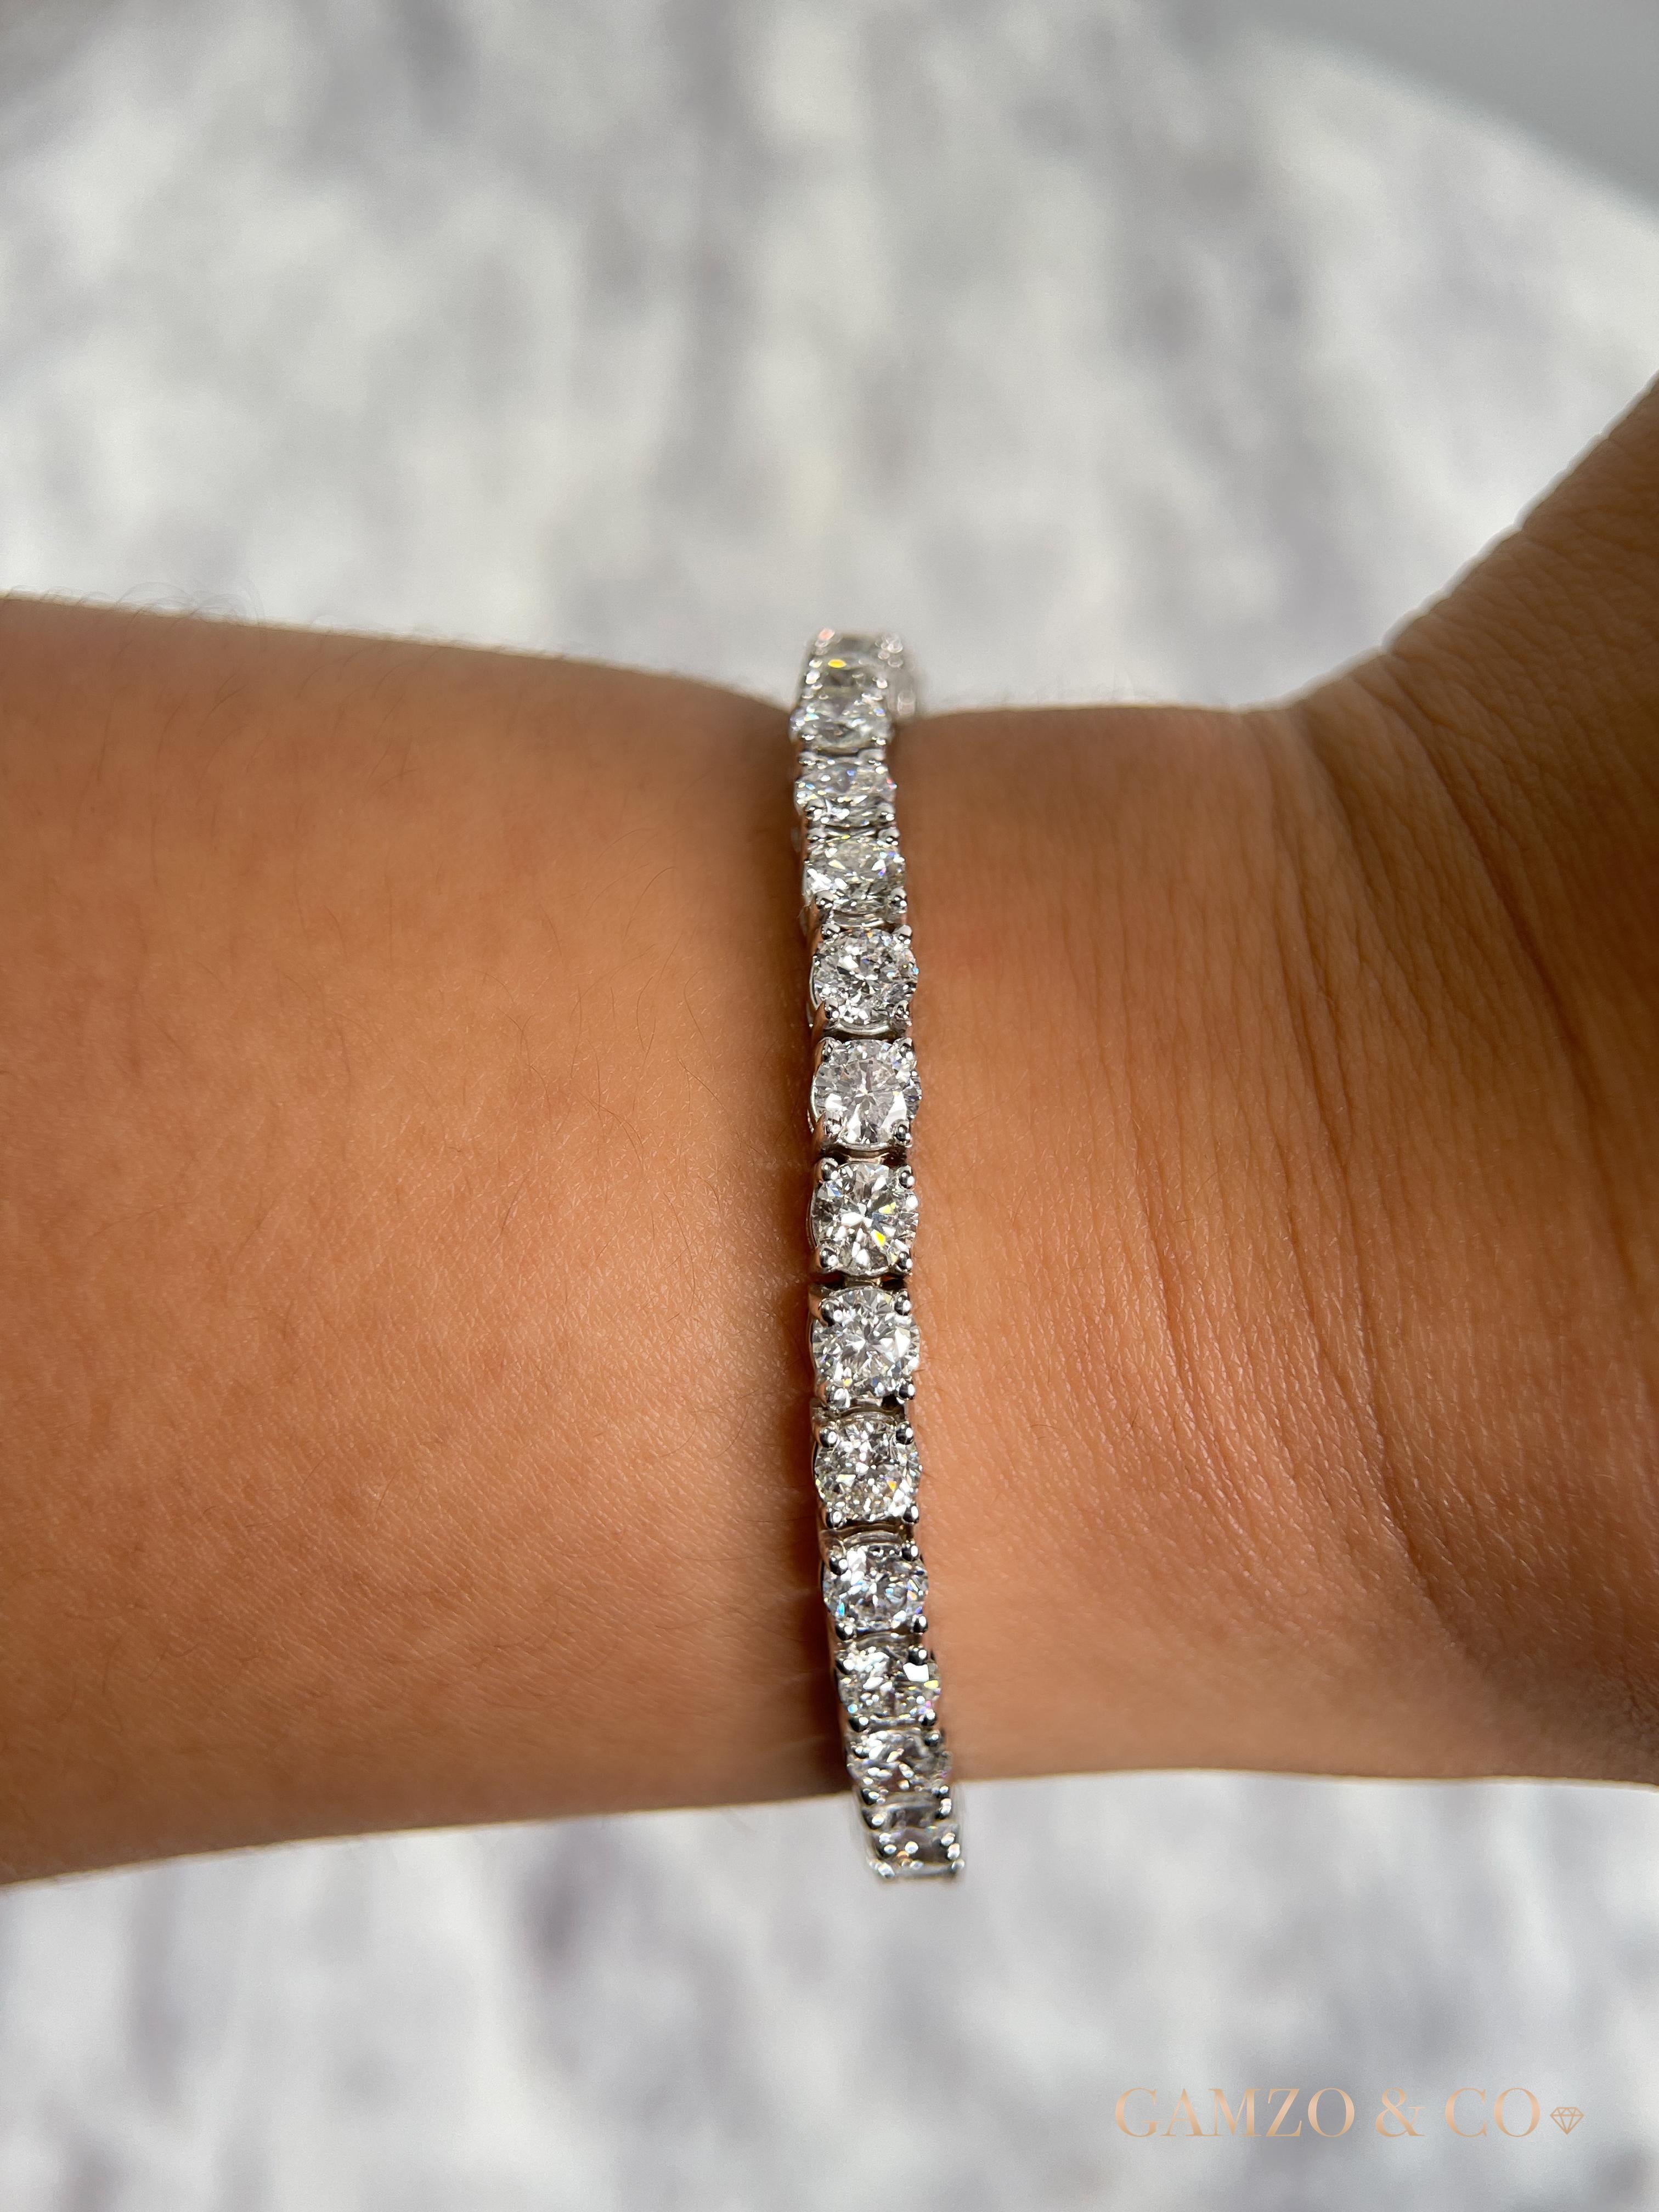 This diamond tennis bracelet features beautifully cut round diamonds set gorgeously in 14k gold.

Metal: 14k Gold
Diamond Cut: Round Natural Diamond 
Total Diamond Carats: 12ct
Diamond Clarity: VS
Diamond Color: F-G
Color: White Gold
Bracelet